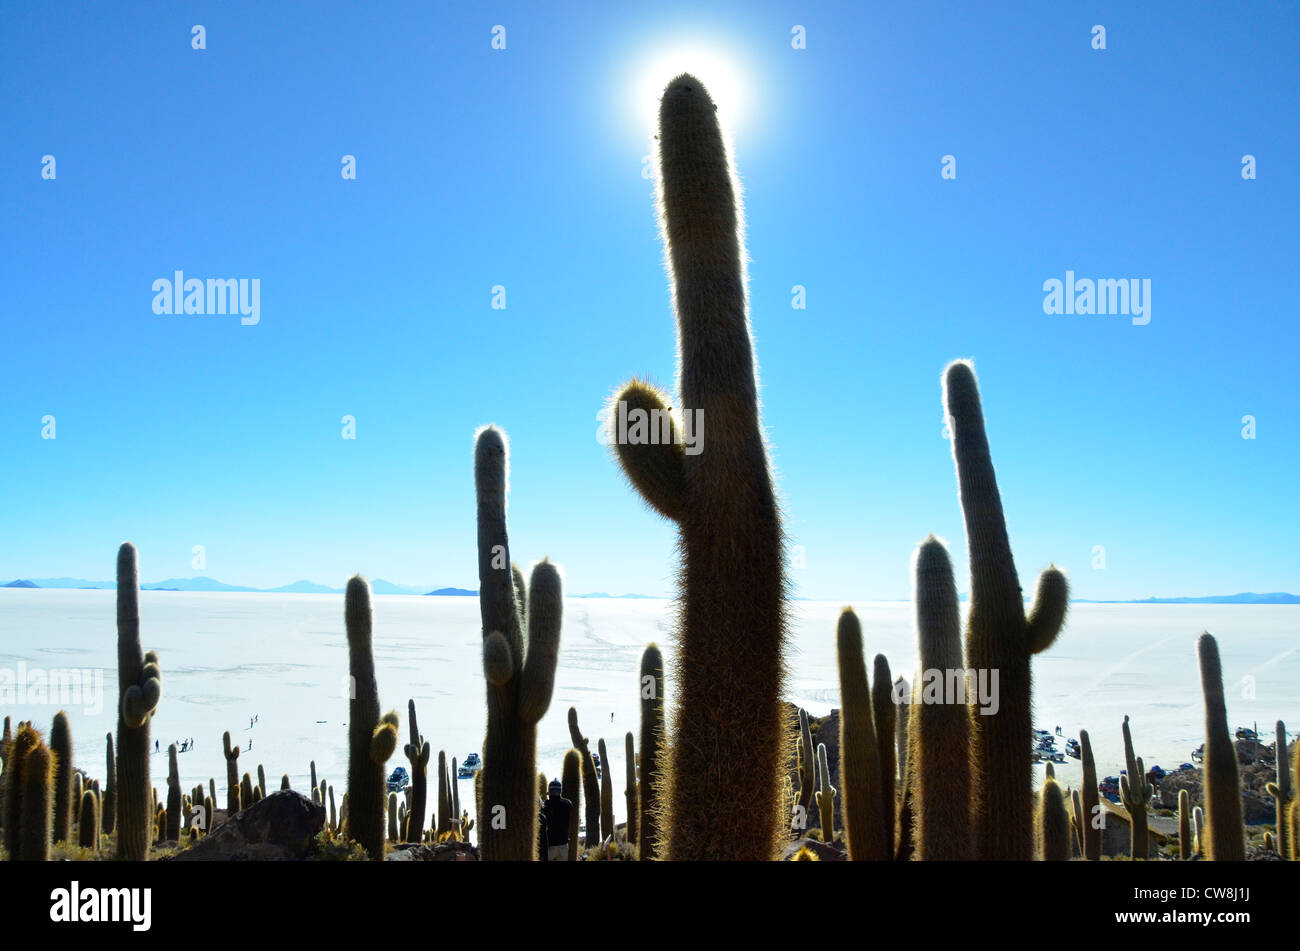 Uyuni Salaar, the biggest salt pan on earth. Andes Altiplano plateau of Bolivia. Altitude about 4000m. Stock Photo